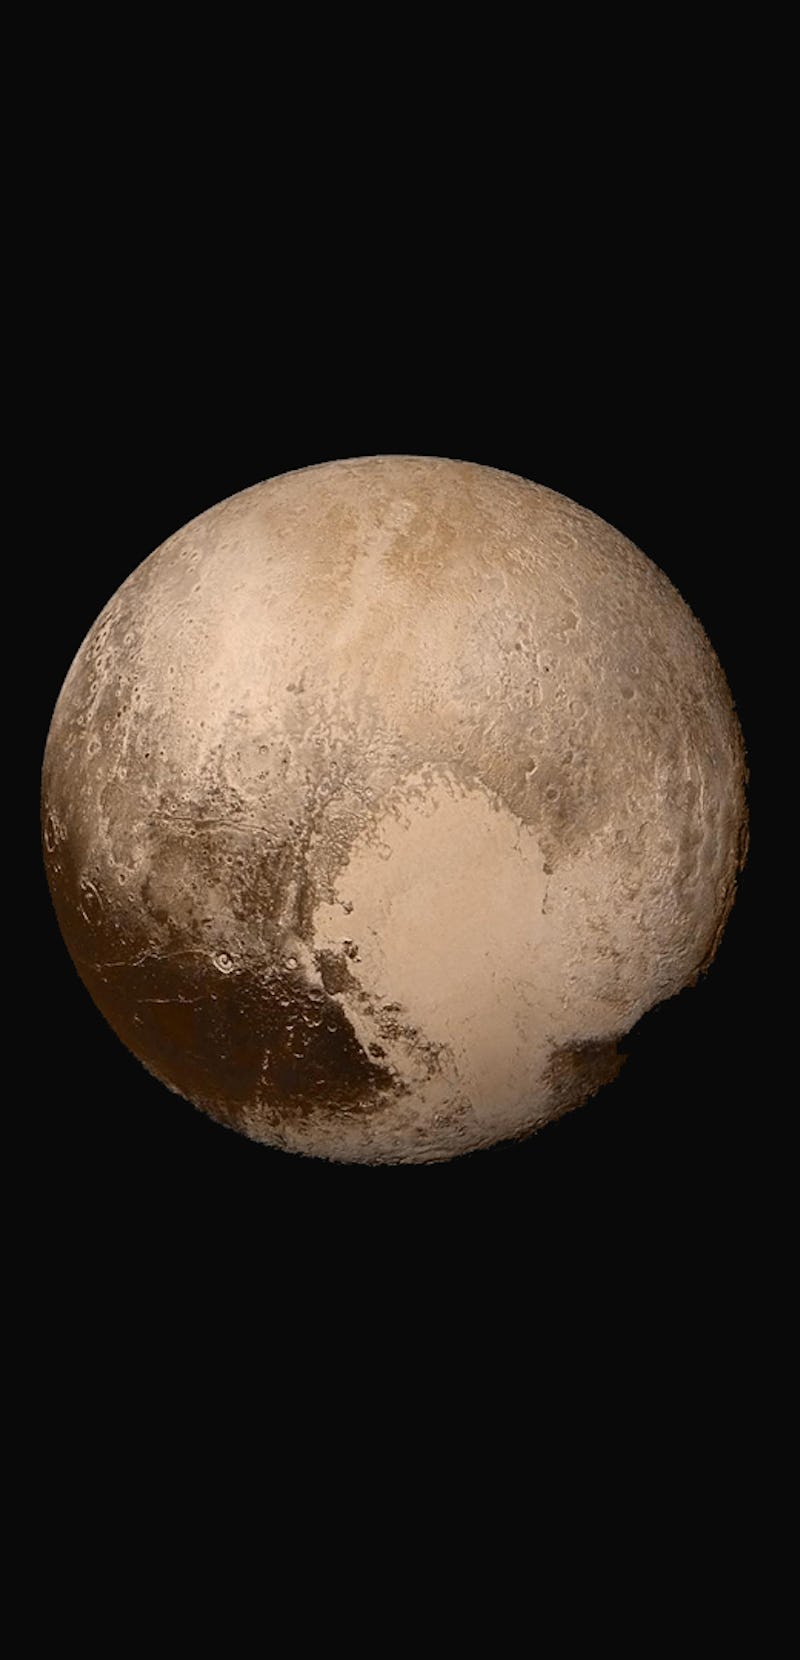 A shot of the planet Pluto from a distance